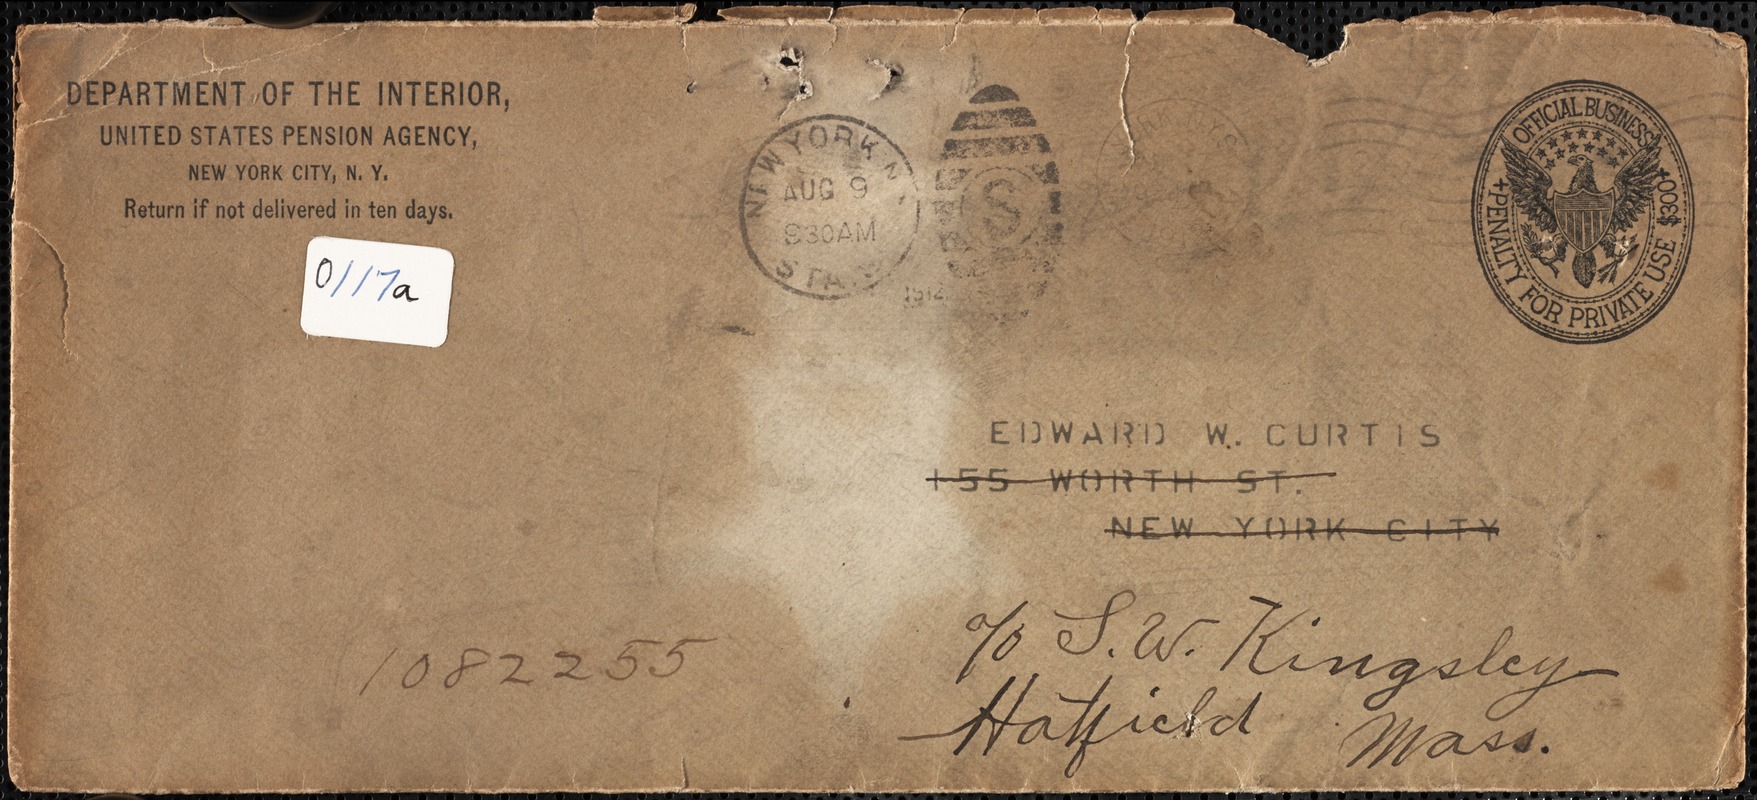 Discharge papers for Edward W. Curtis